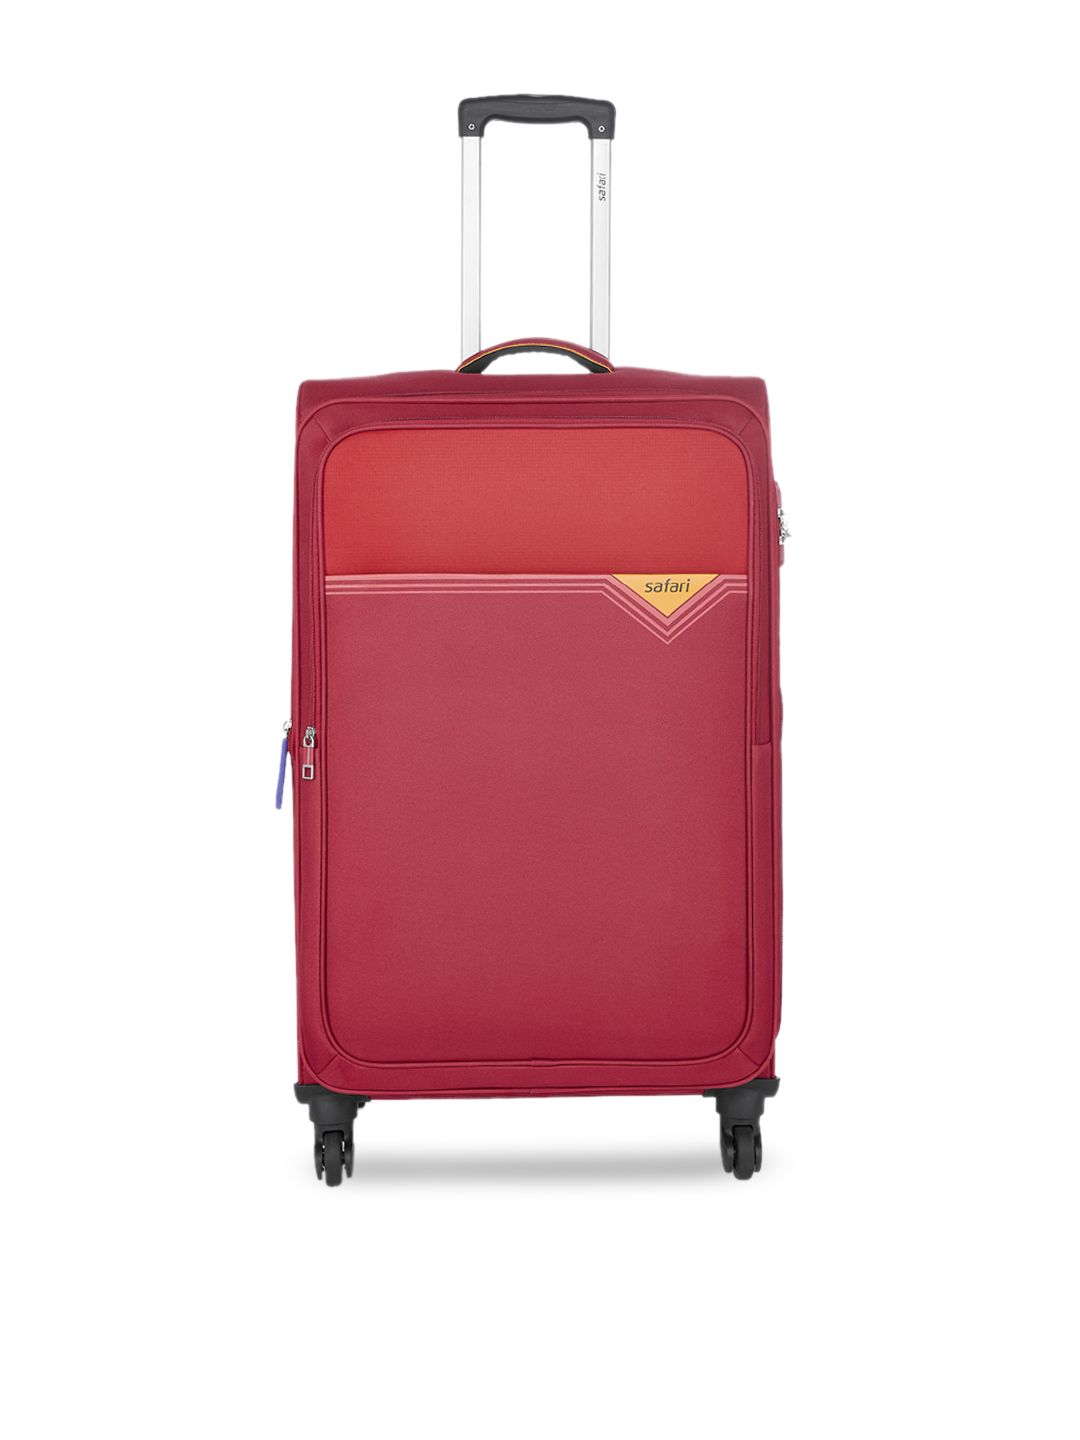 Safari Unisex Red Solid Cabin Trolley Suitcase Price in India